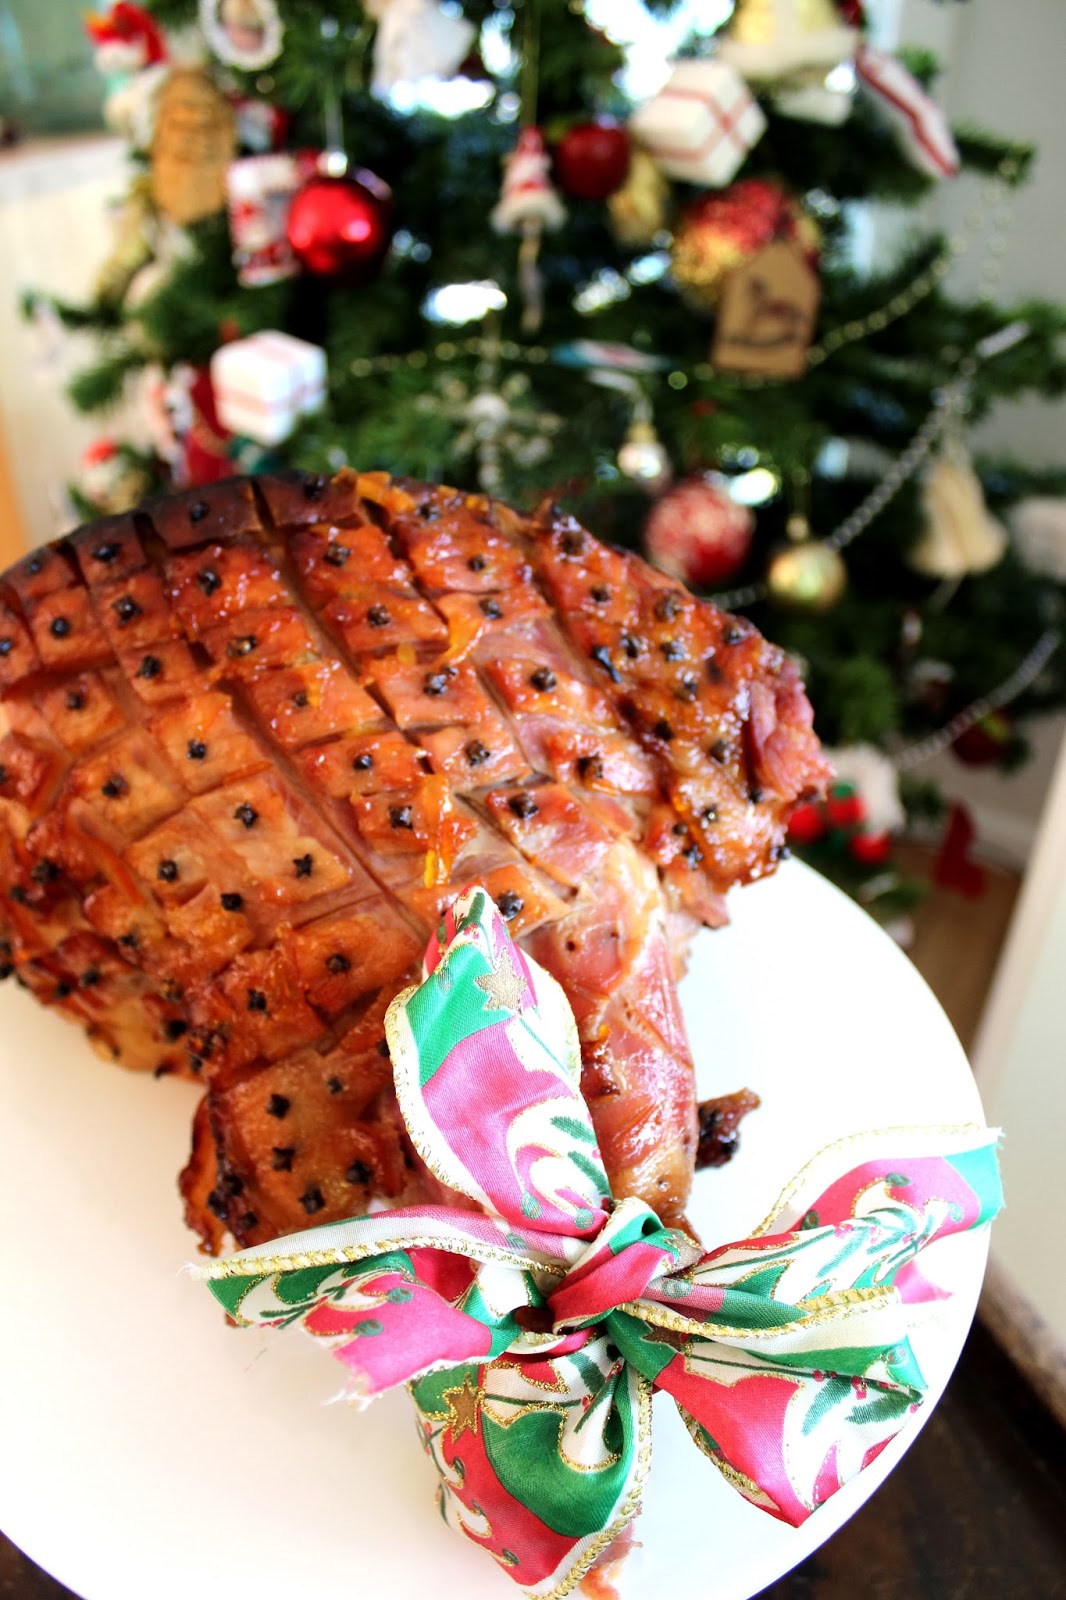 Desire Empire: Glazed Christmas Ham with Guinness, Pineapple Juice and ...